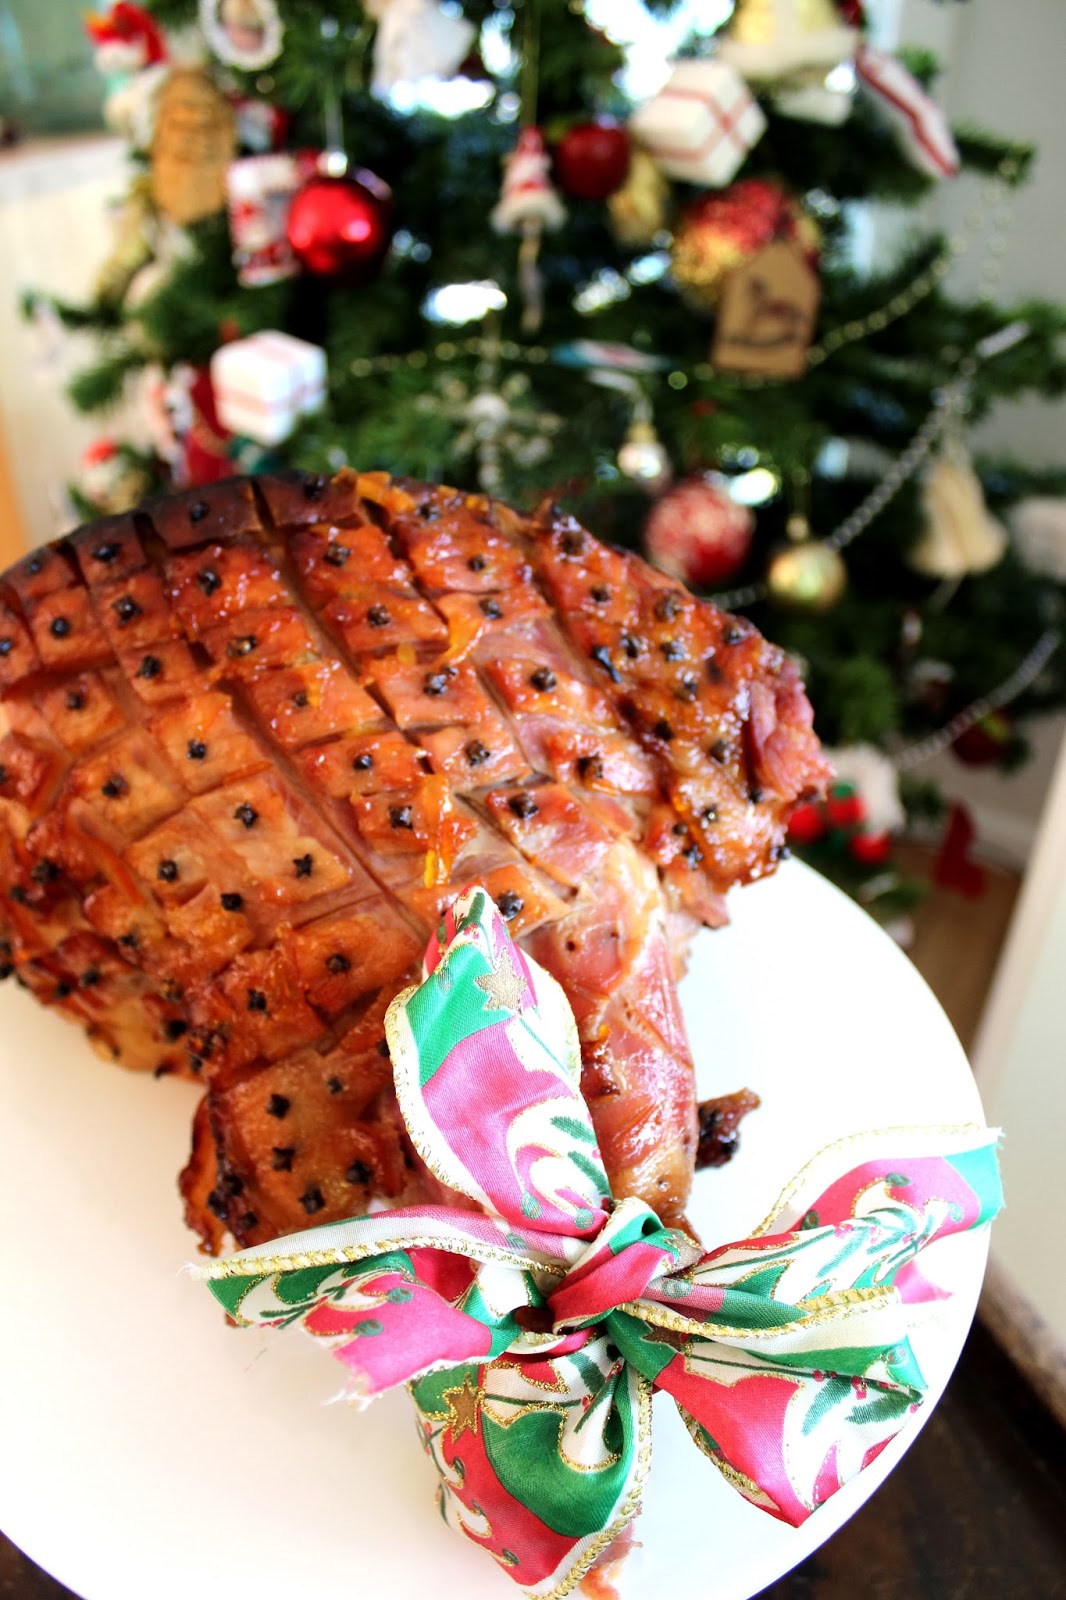 Desire Empire: Glazed Christmas Ham with Guinness, Pineapple Juice and ...